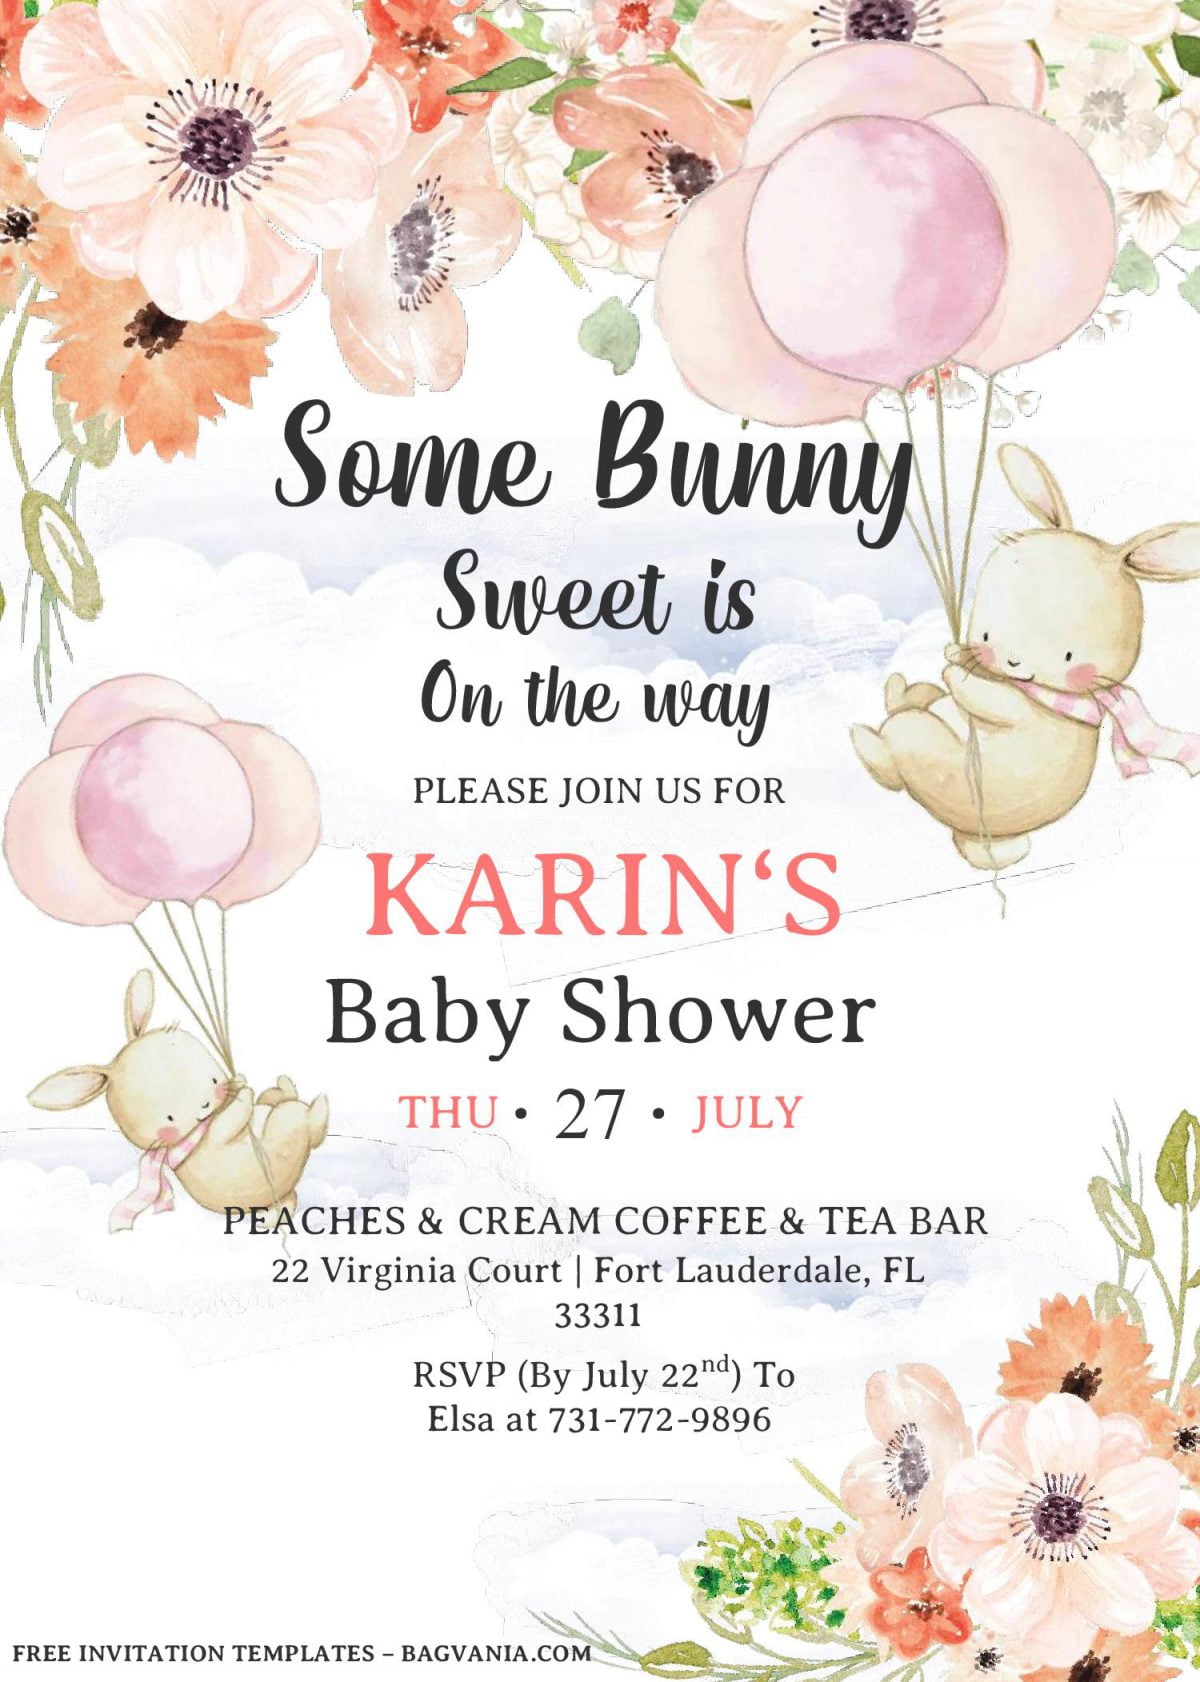 Some Bunny Invitation Templates - Editable With MS Word and has white background